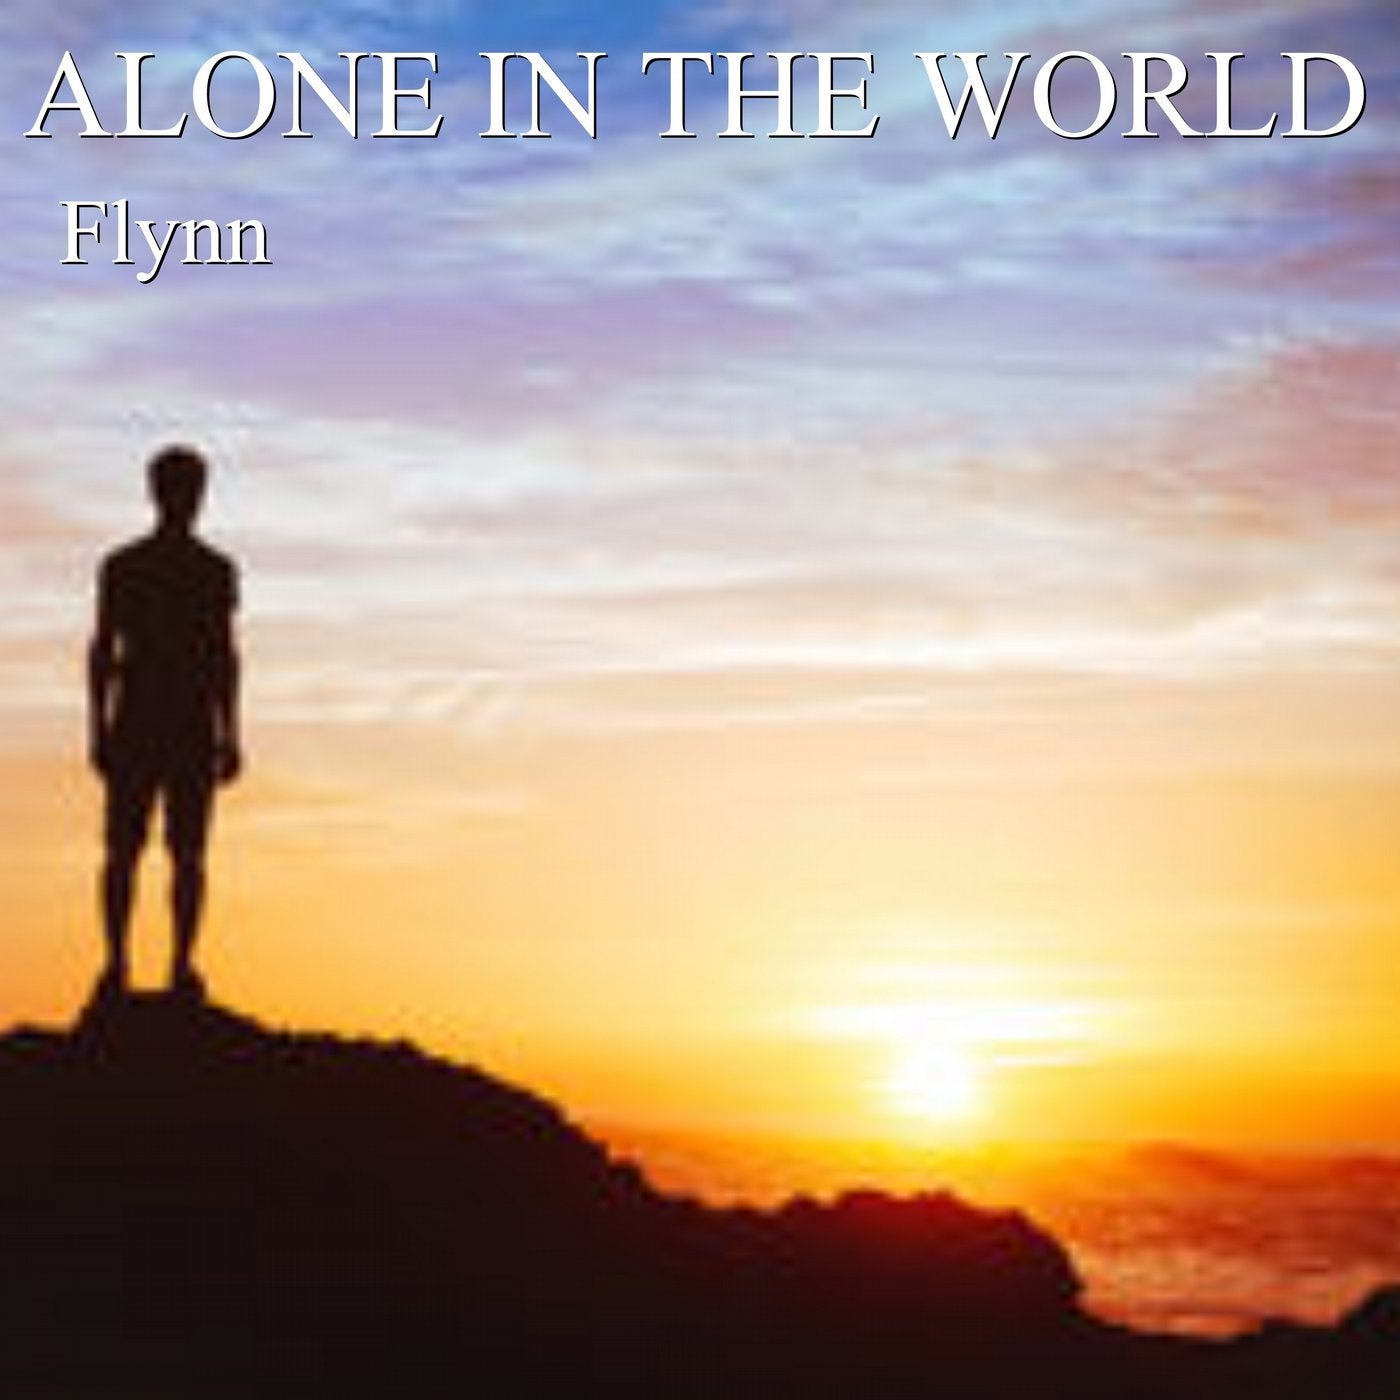 Alone in the World